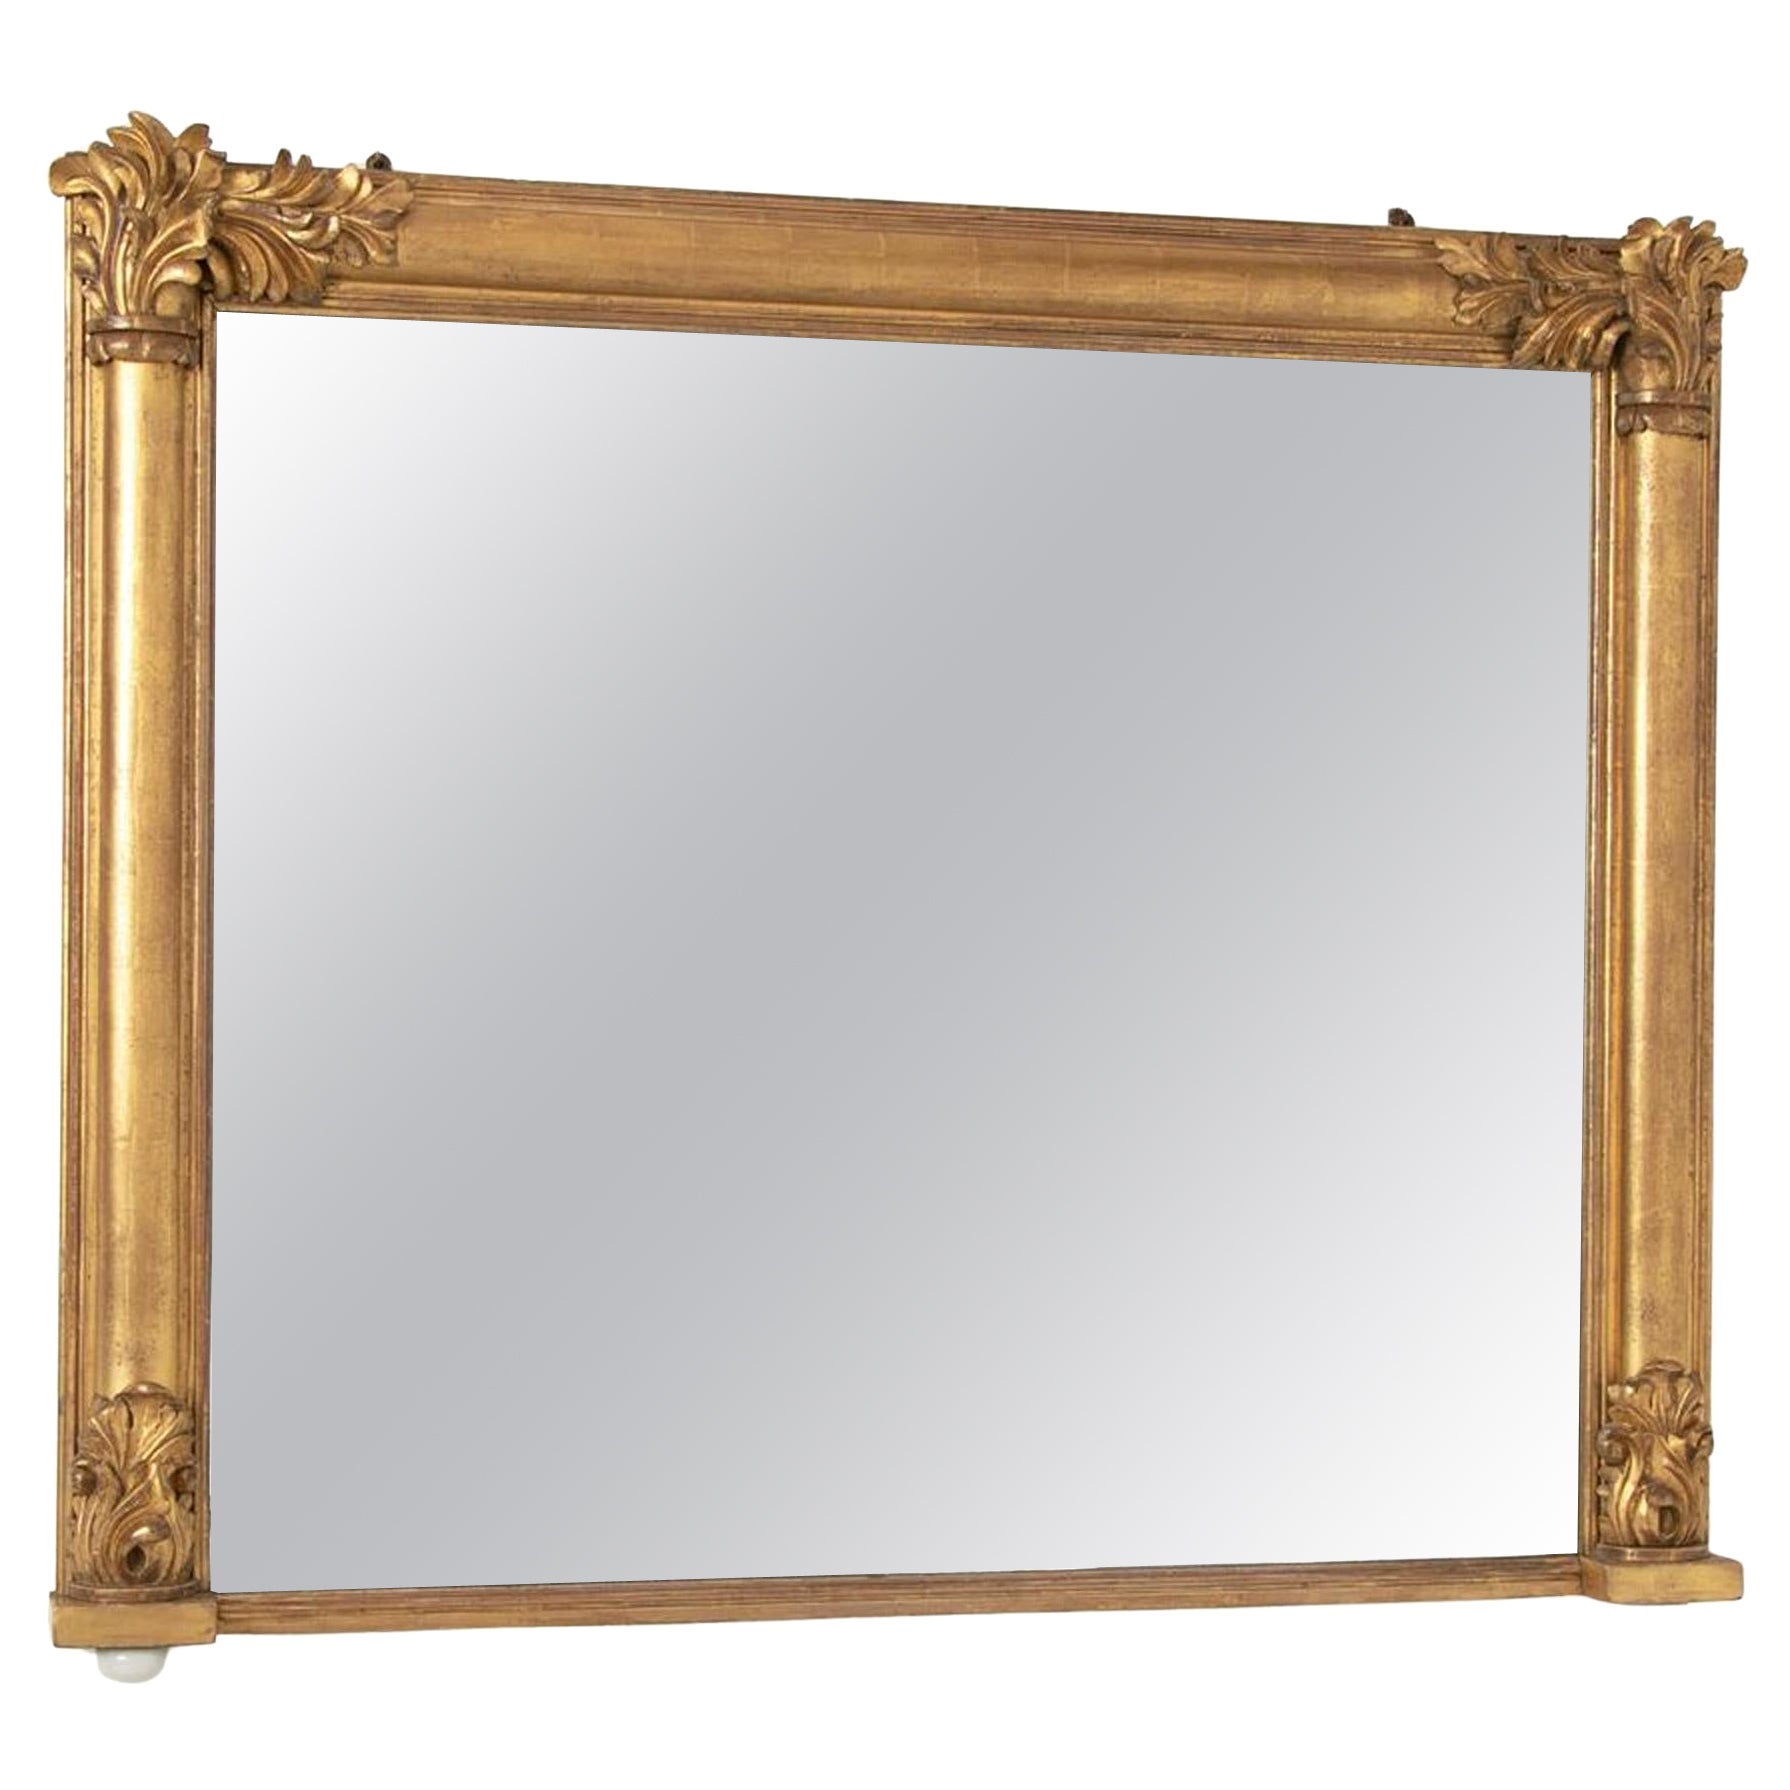 Antique Gilt Overmantle Mirror Made by William Cribb, C.1825 For Sale